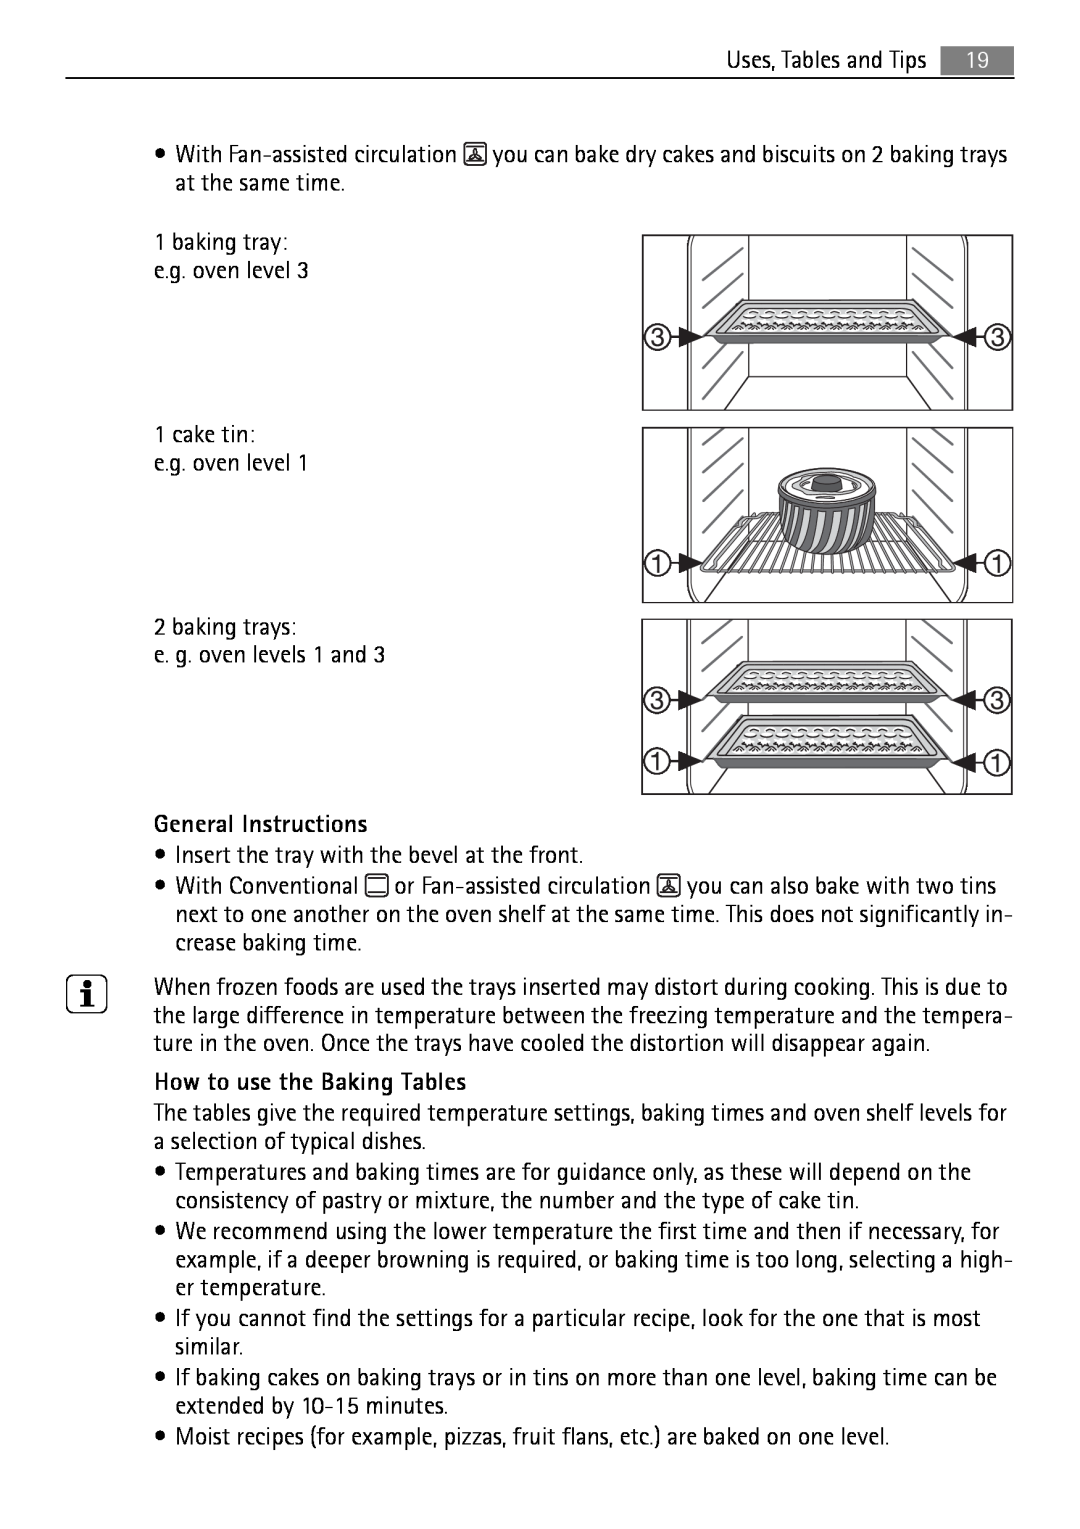 Electrolux B3741-5 user manual General Instructions, How to use the Baking Tables 